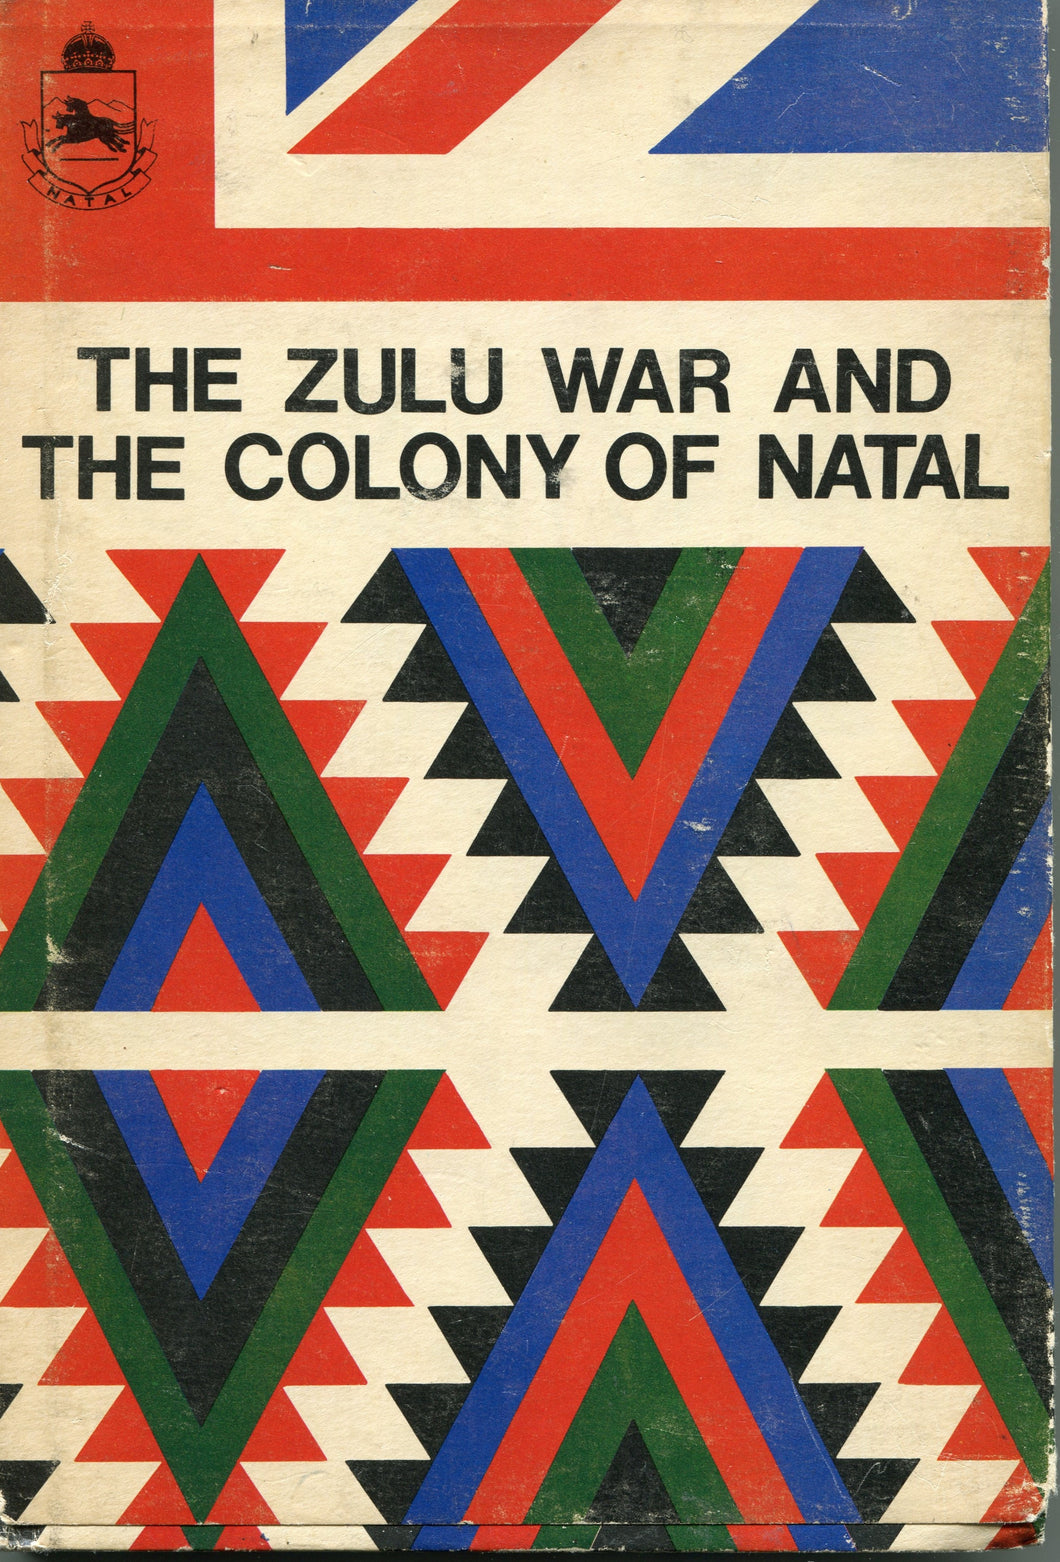 THE ZULU WAR AND THE COLONY OF NATAL edited by Ga.A. Chadwick and E.G. Hobson